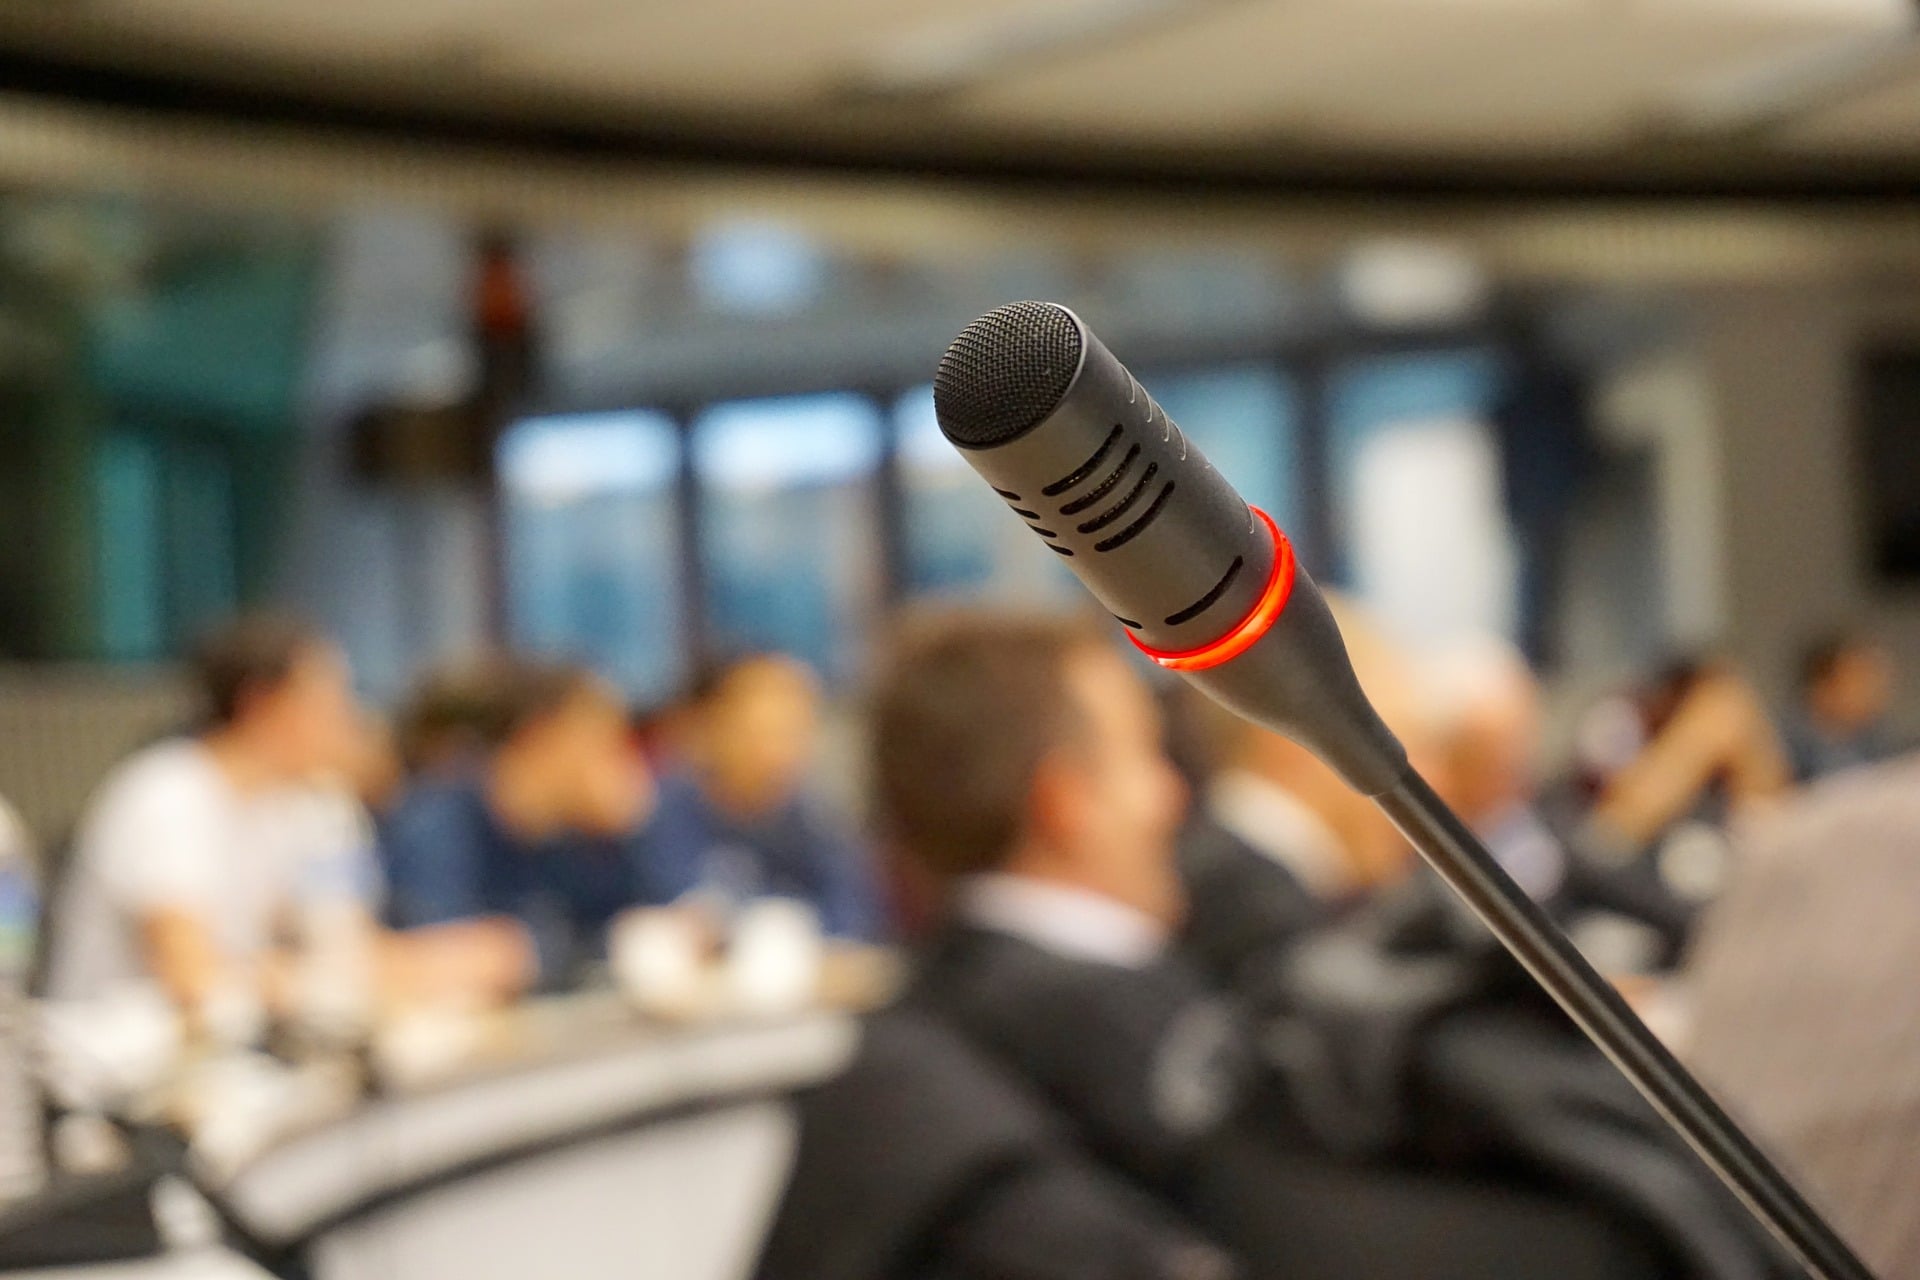 VSES members conference presentation microphone